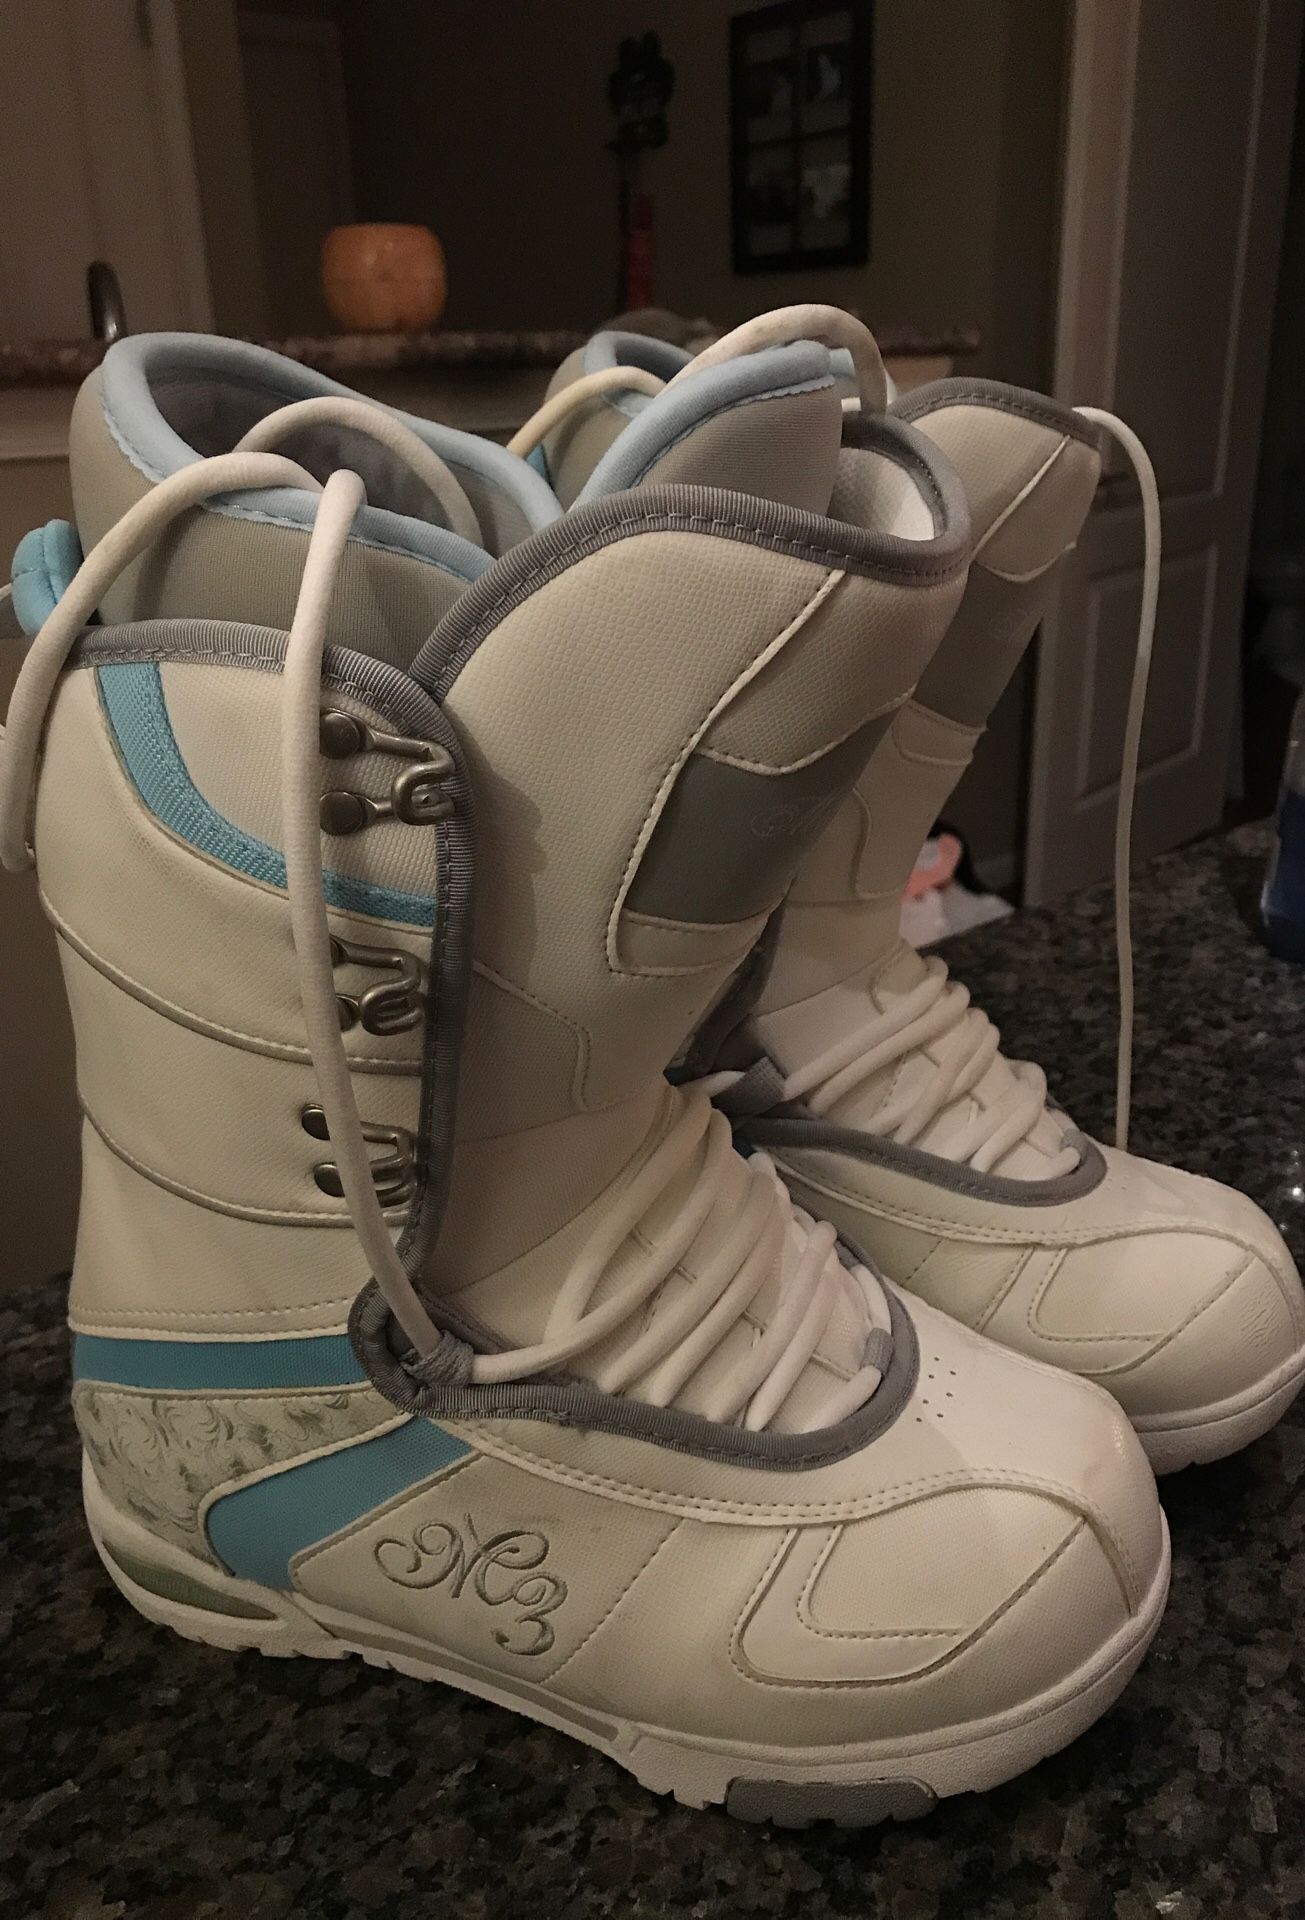 Women’s snowboarding boots Size 8